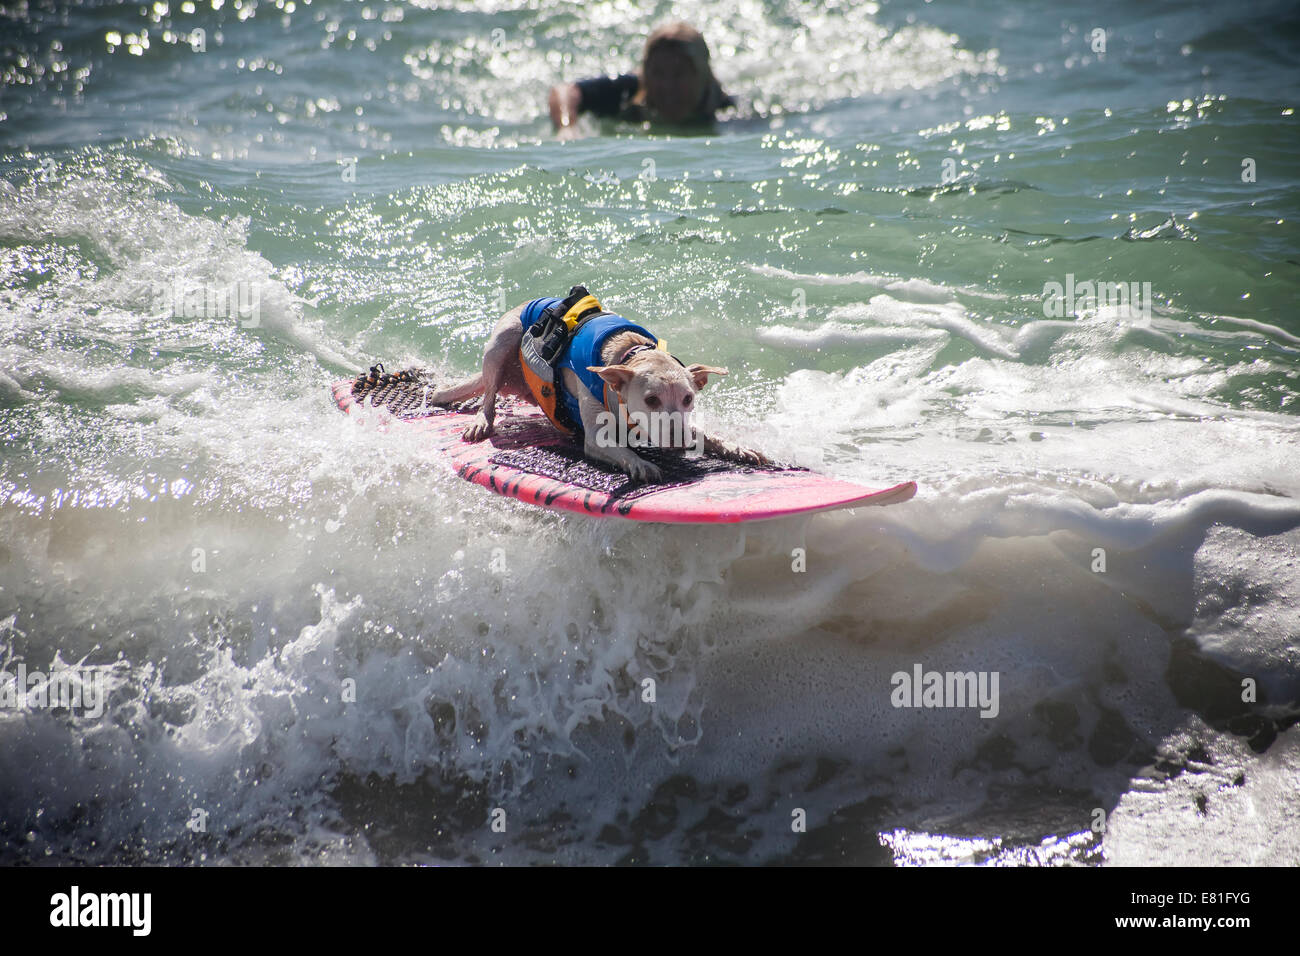 Huntington Beach, CA, USA. 28th September, 2014. A dog competes at Surf City Surf Dog™ annual canine surfing competition. Dogs of all sizes "hang 20" as they compete in four weight-class divisions, as well as a tandem heat. They are judged on a variety of skills, including the duration of their ride and their confidence on the board. Credit:  Andie Mills/Alamy Live News Stock Photo